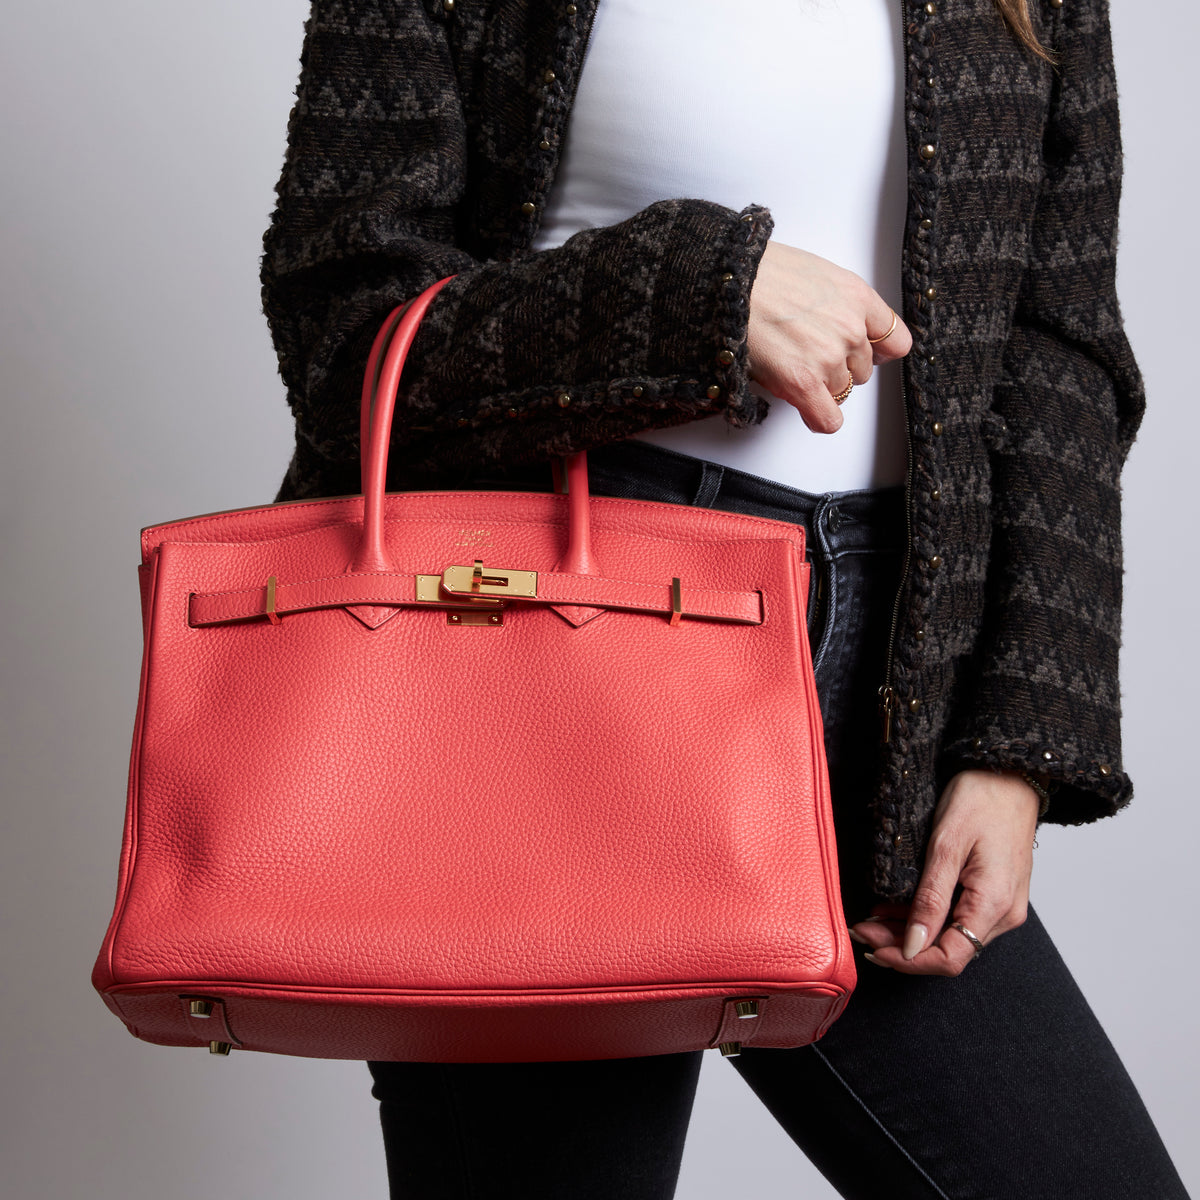 Excellent Pre-Loved Bright Rosy Red Grained Leather Top Handle Bag(on body)